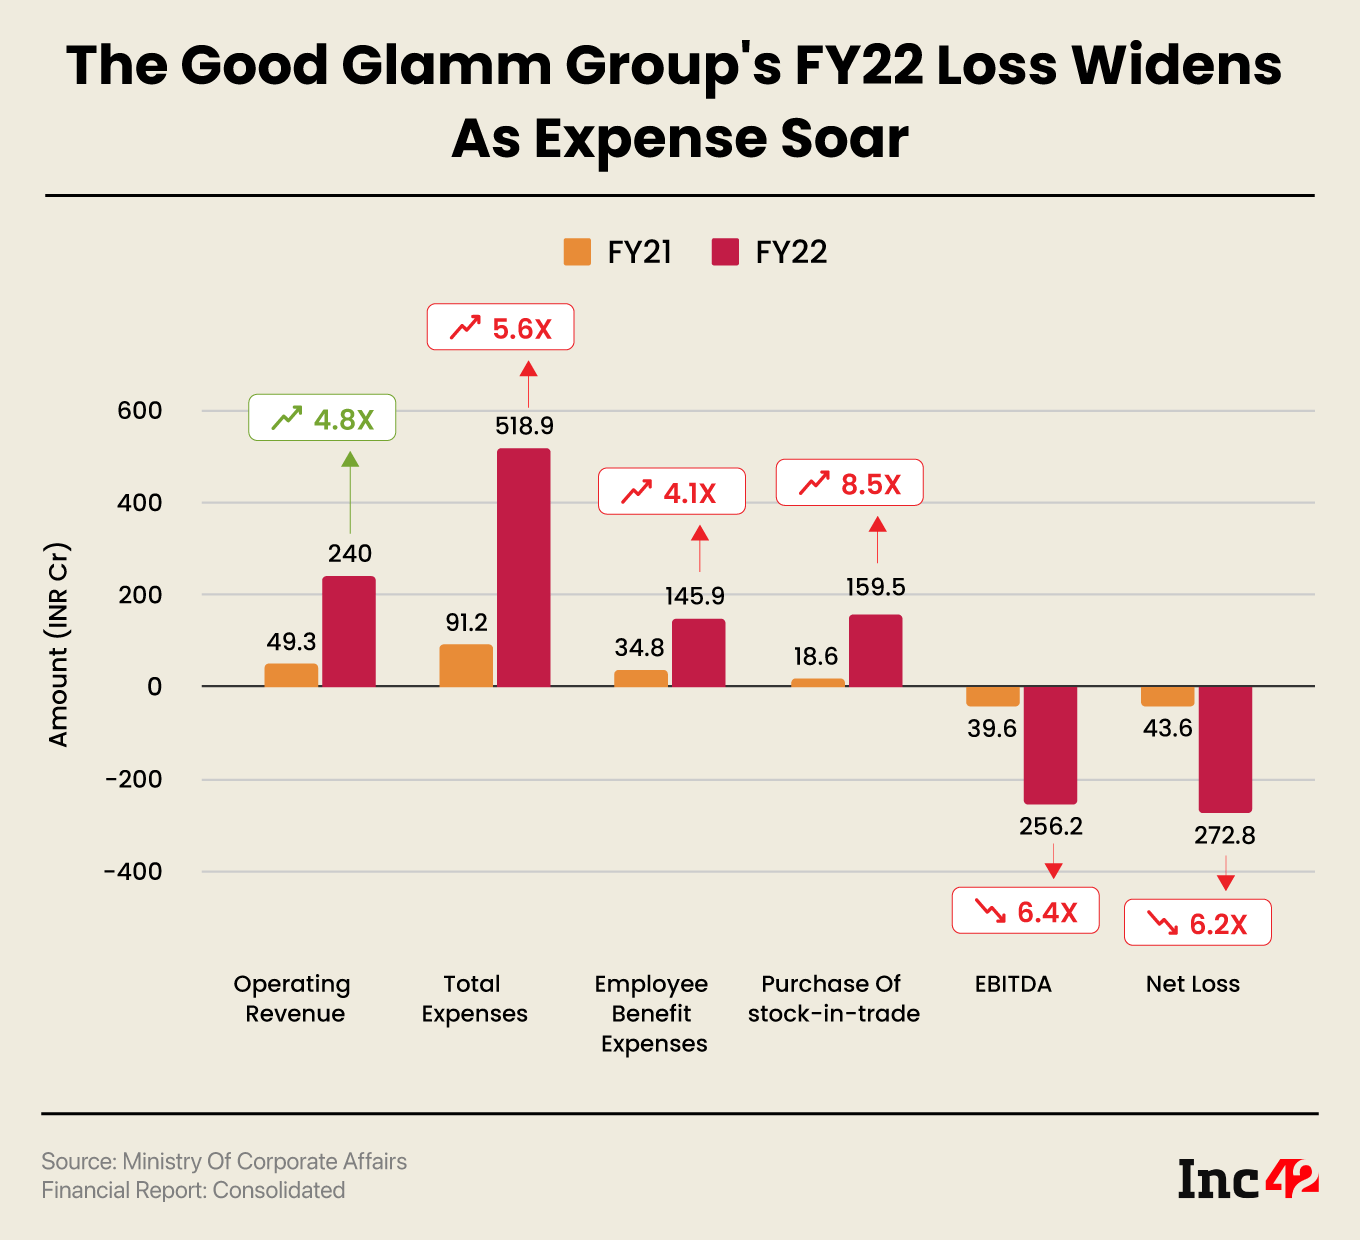 The Good Glamm Group’s FY22 Loss Surges 6.2X To INR 273 Cr, Sales Jump To INR 240 Cr